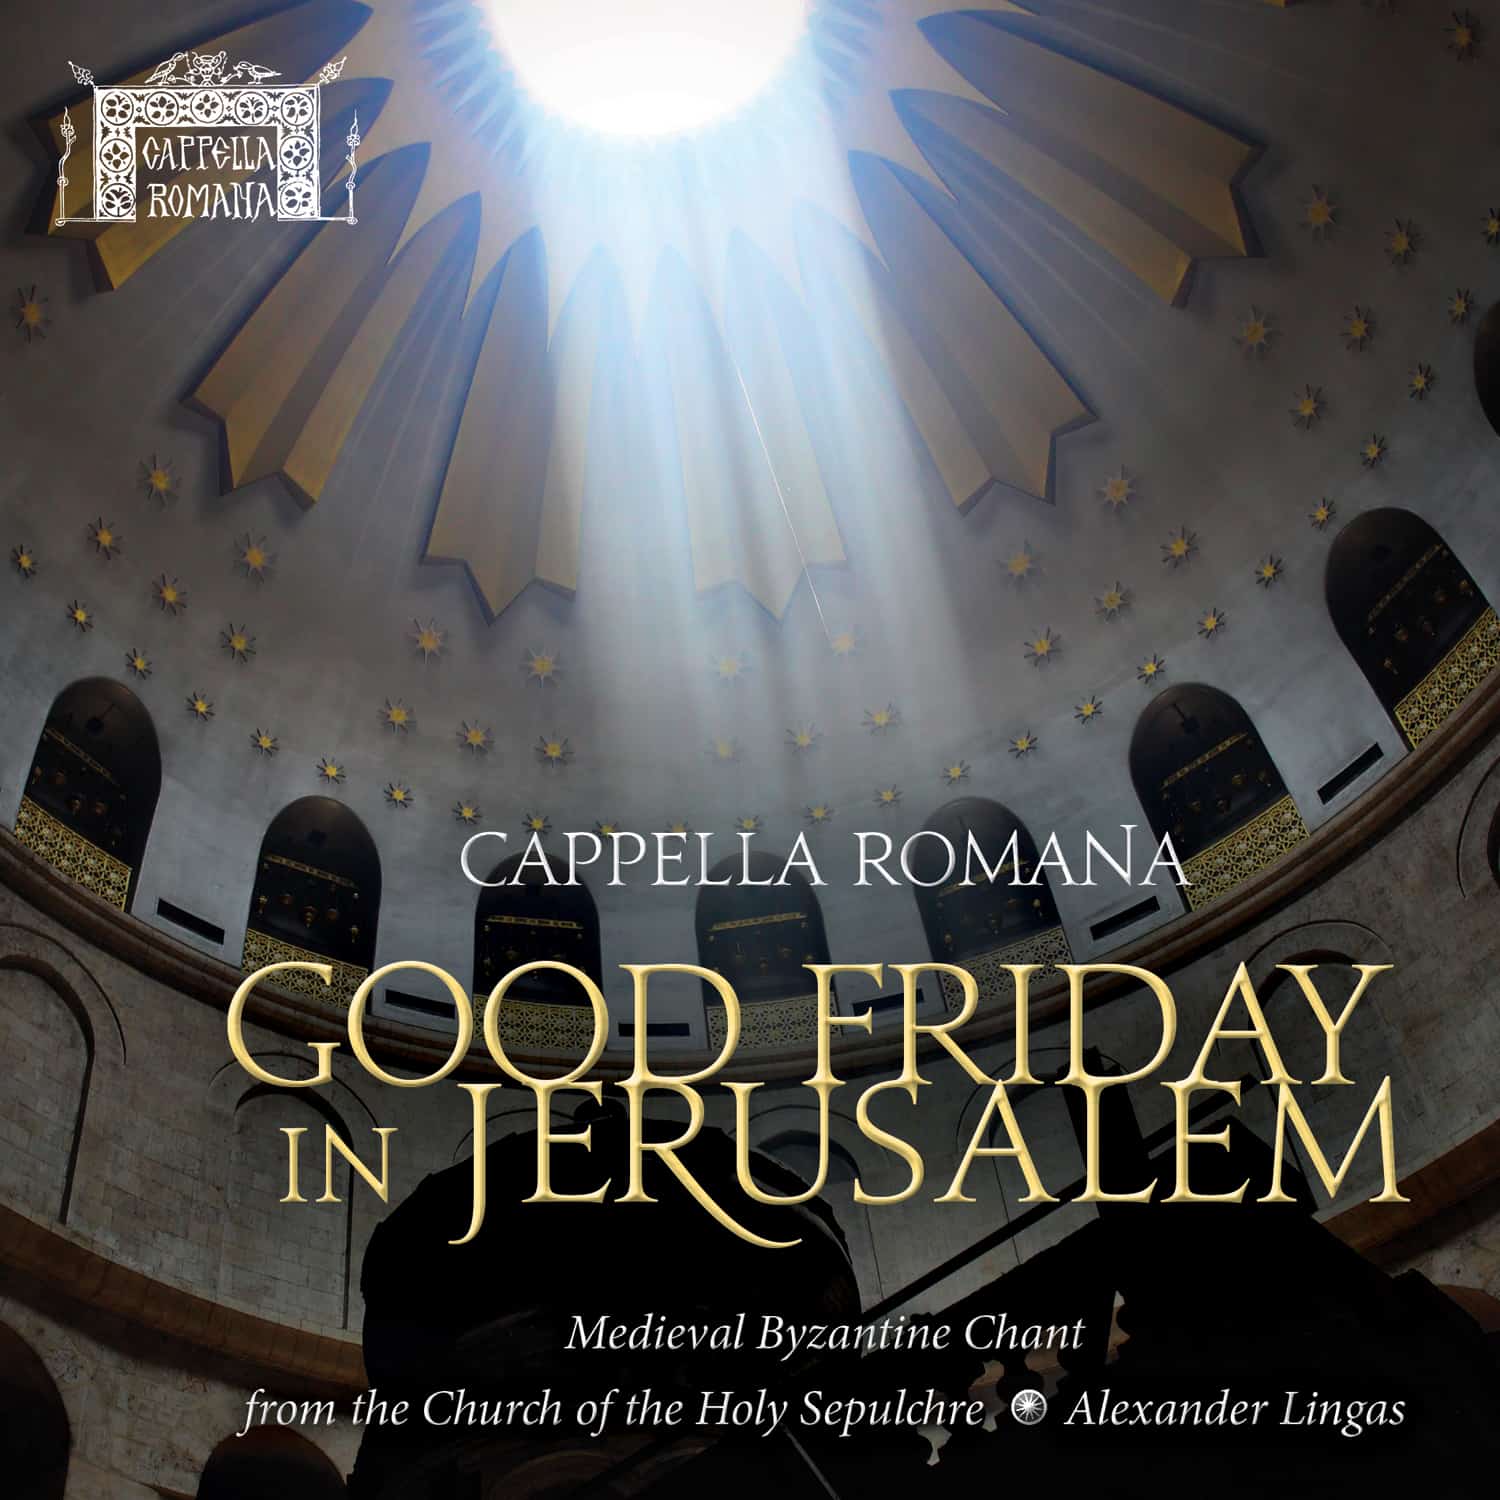 Good Friday in Jerusalem: Medieval Byzantine Chant from the Holy Sepulchre